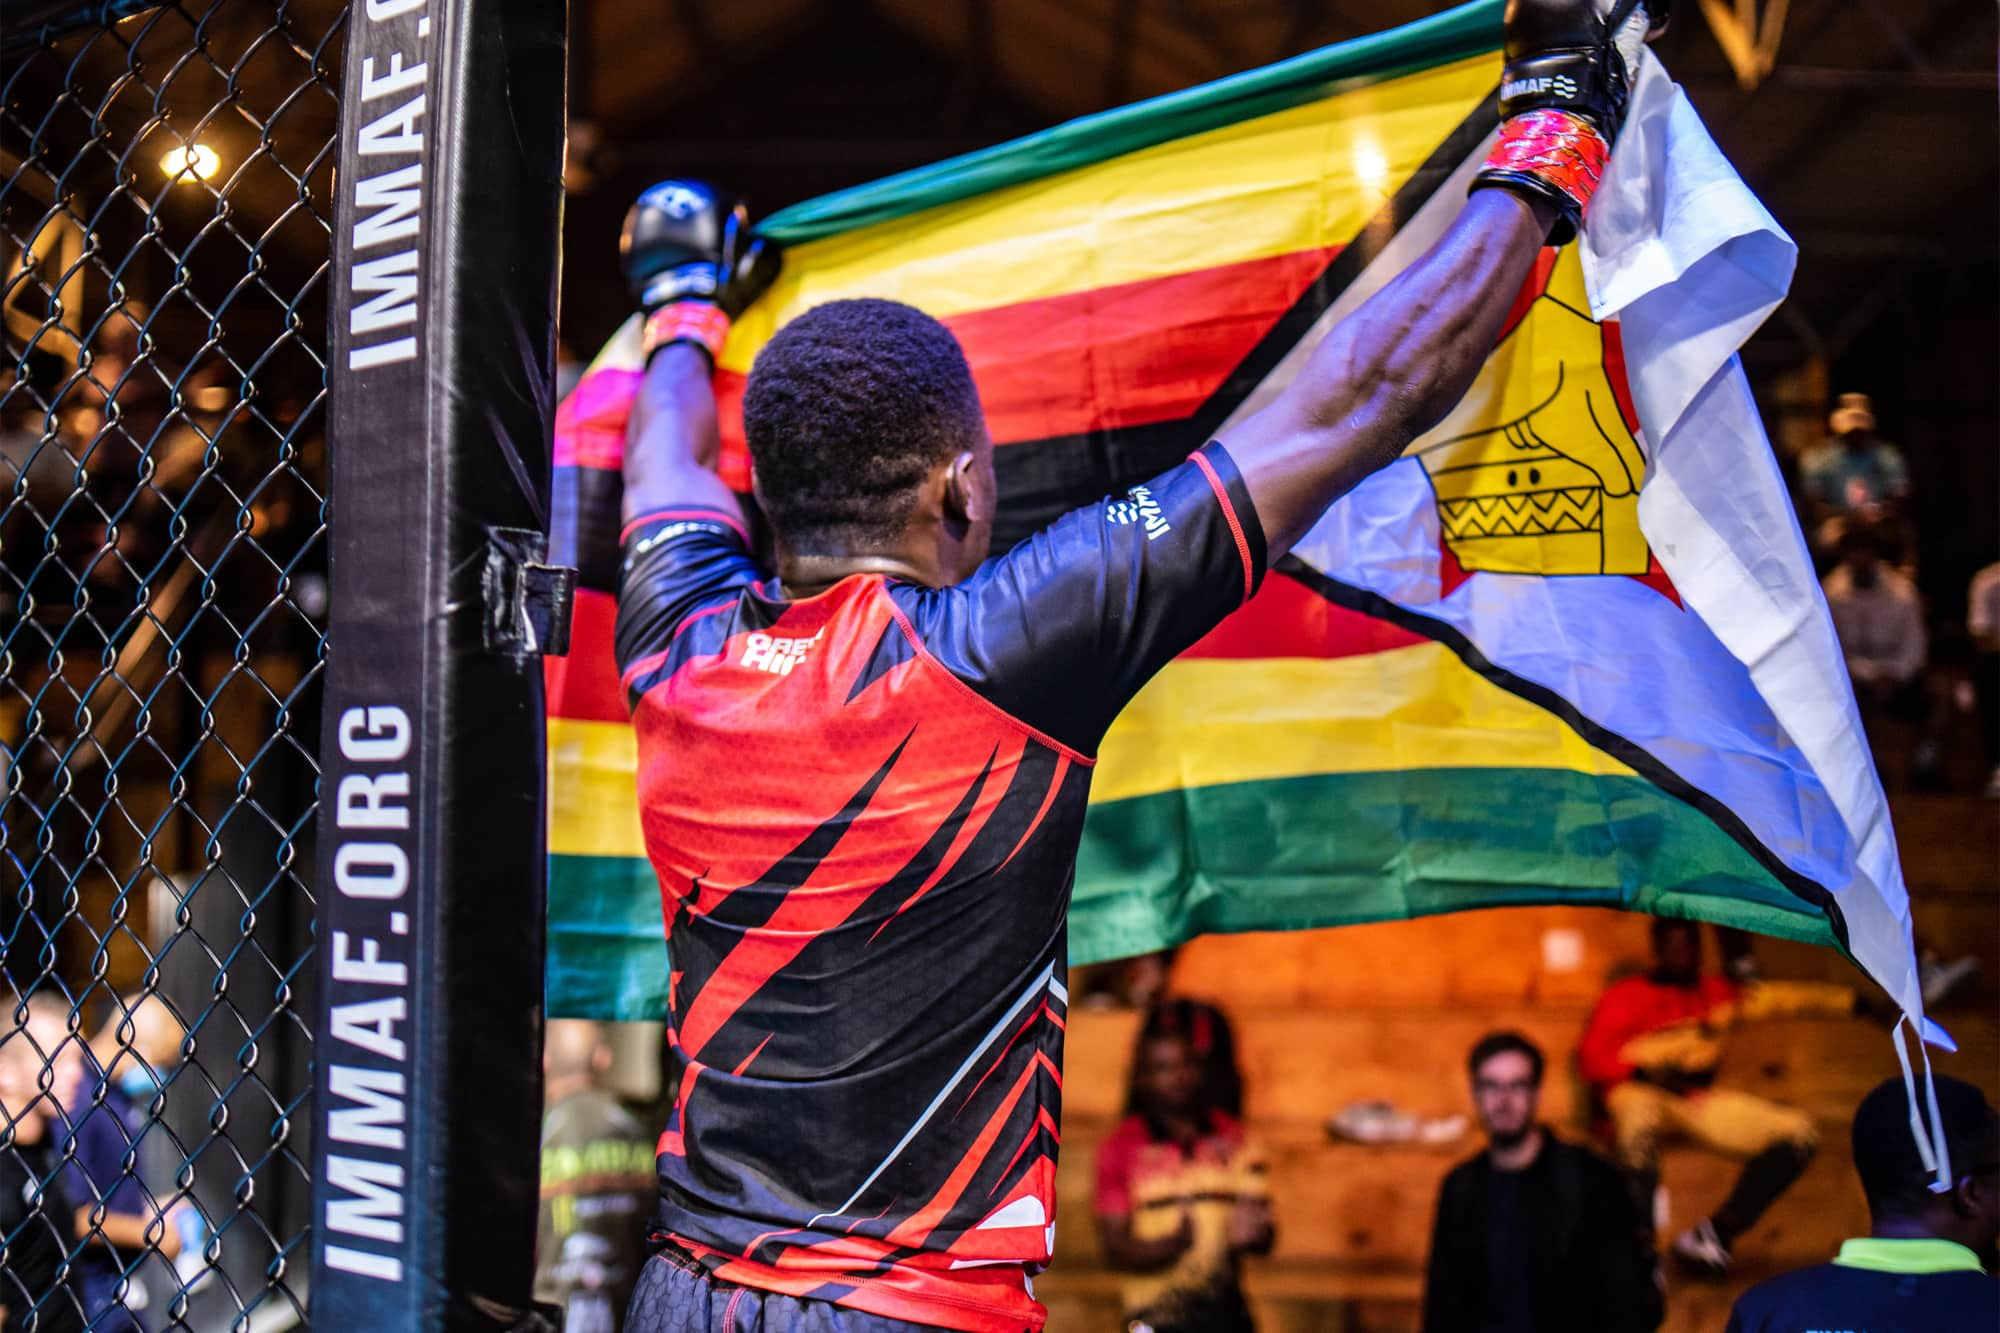 IMMAF has claimed that it should be running the African Games tournament ©IMMAF 